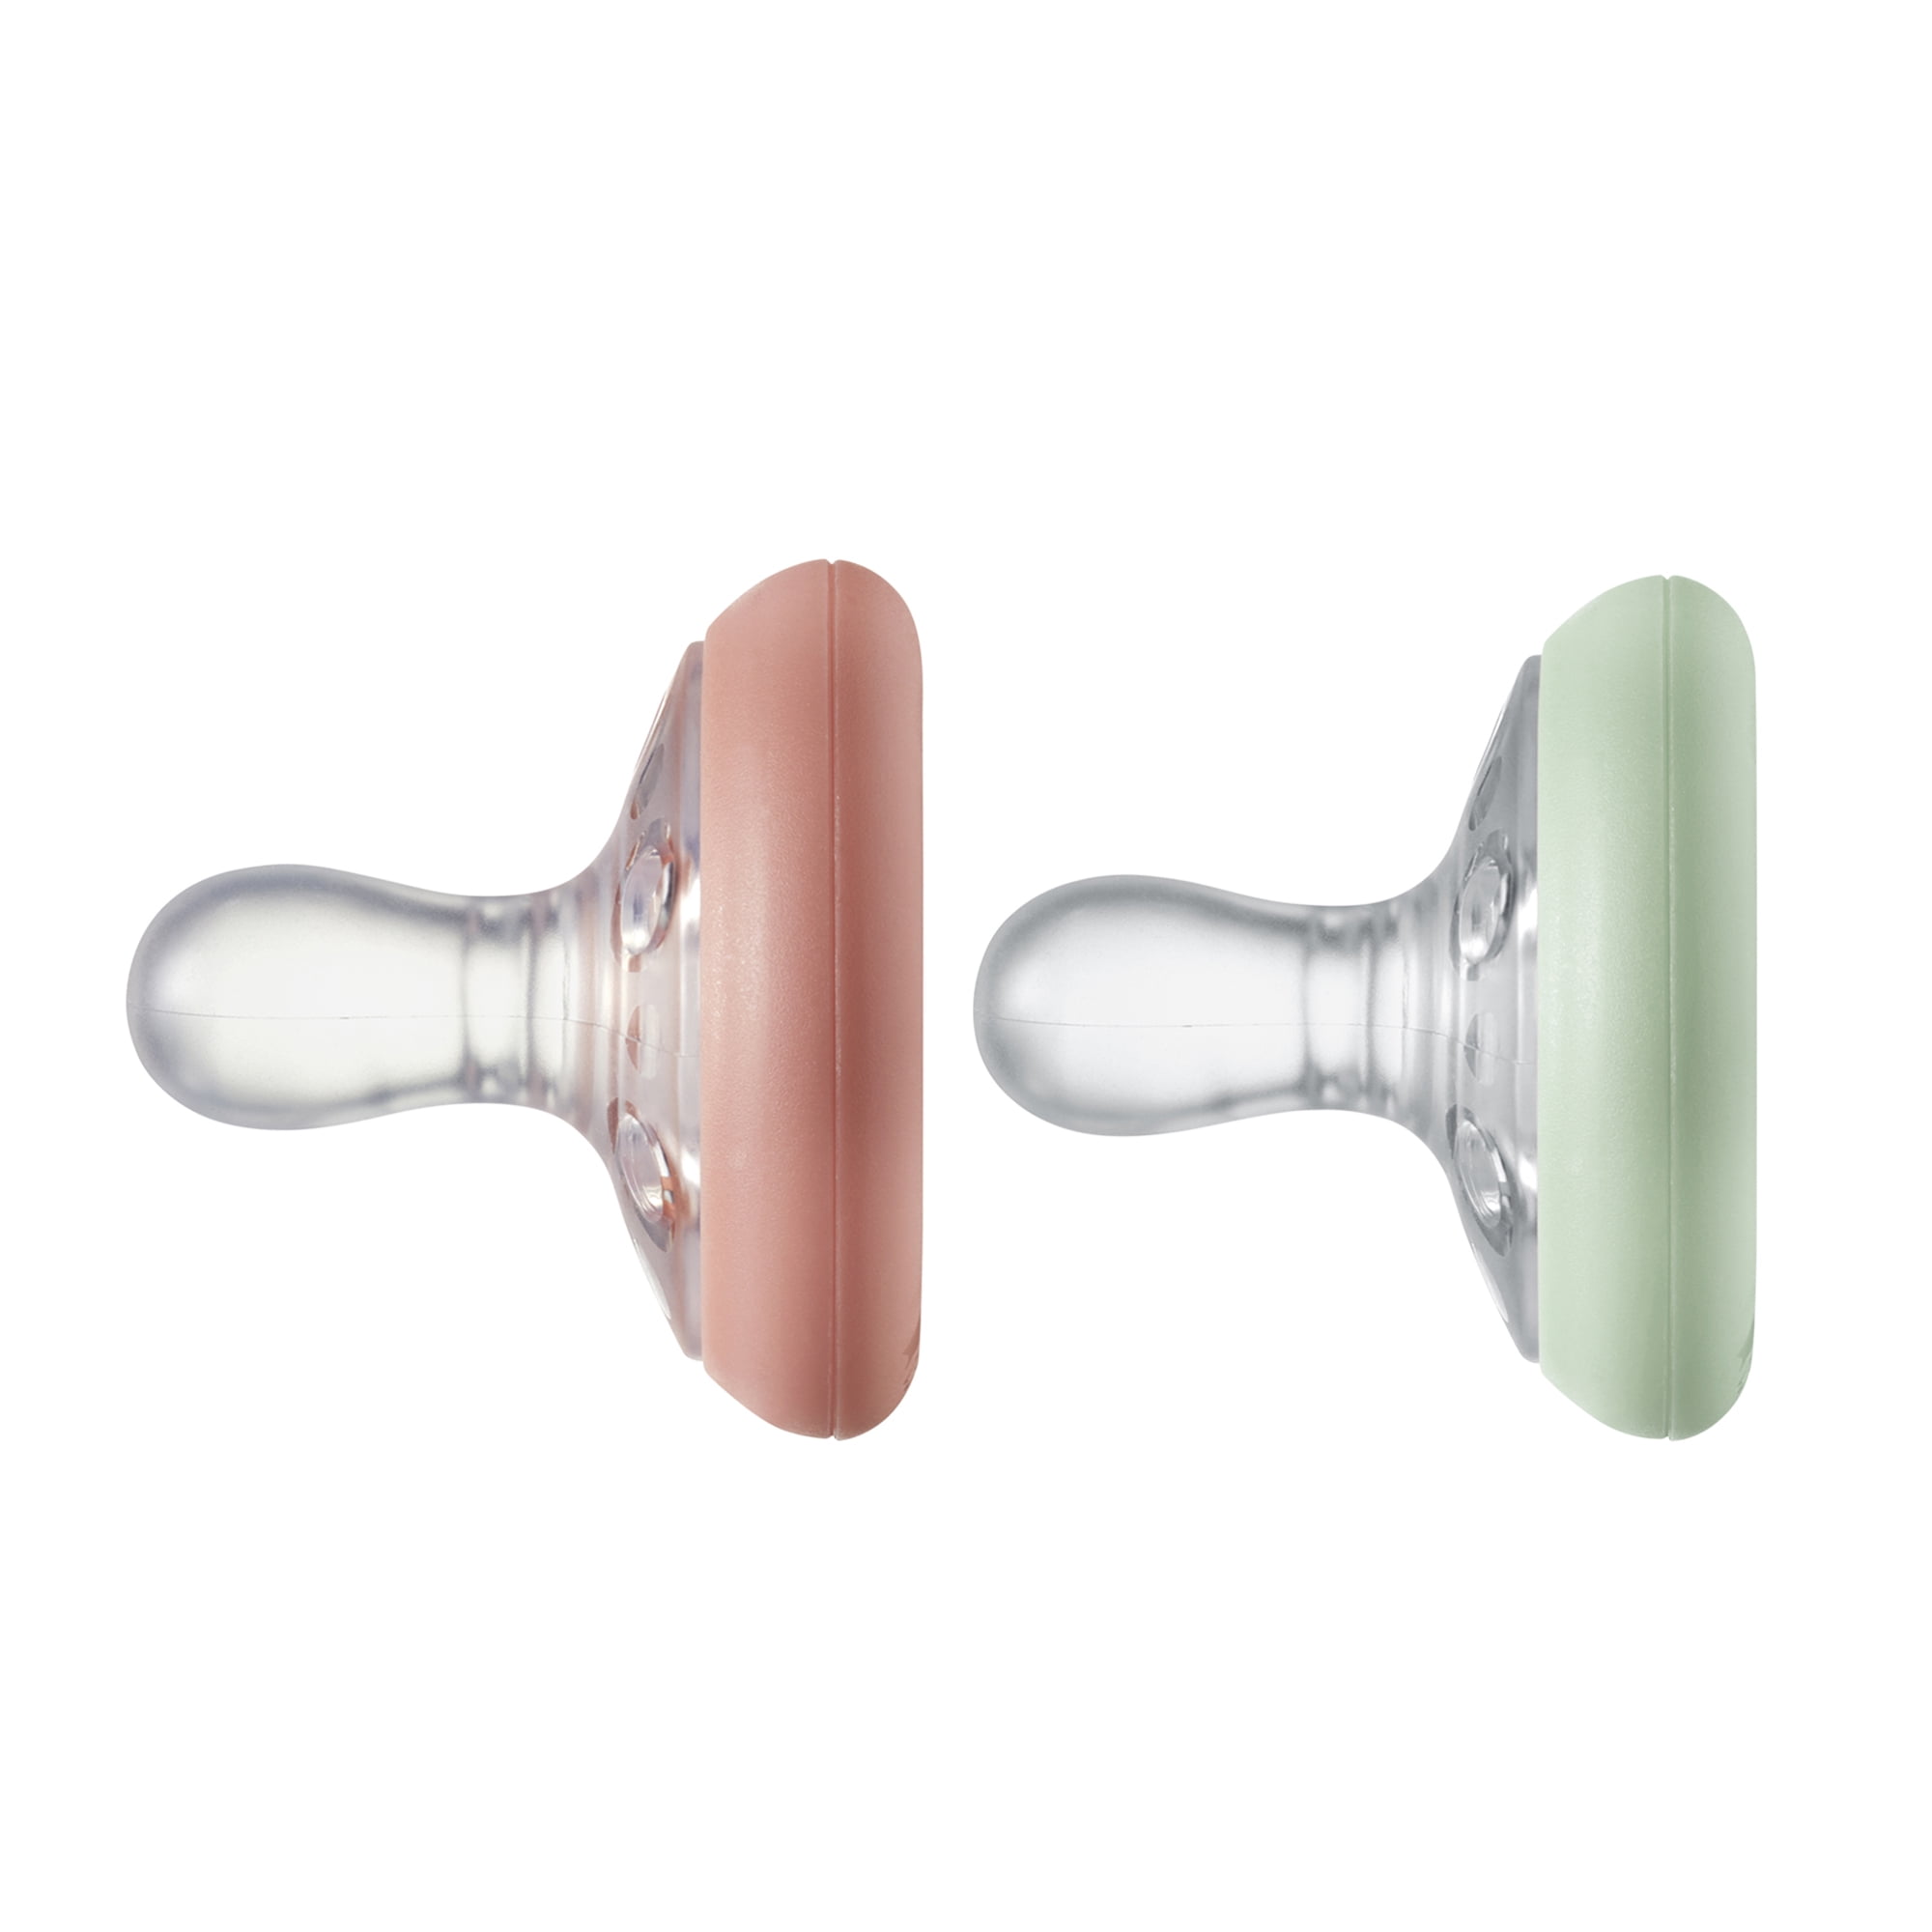 Tommee Tippee Breast Like Orthodontic Silicone Pacifier 0-6M 2 pcs